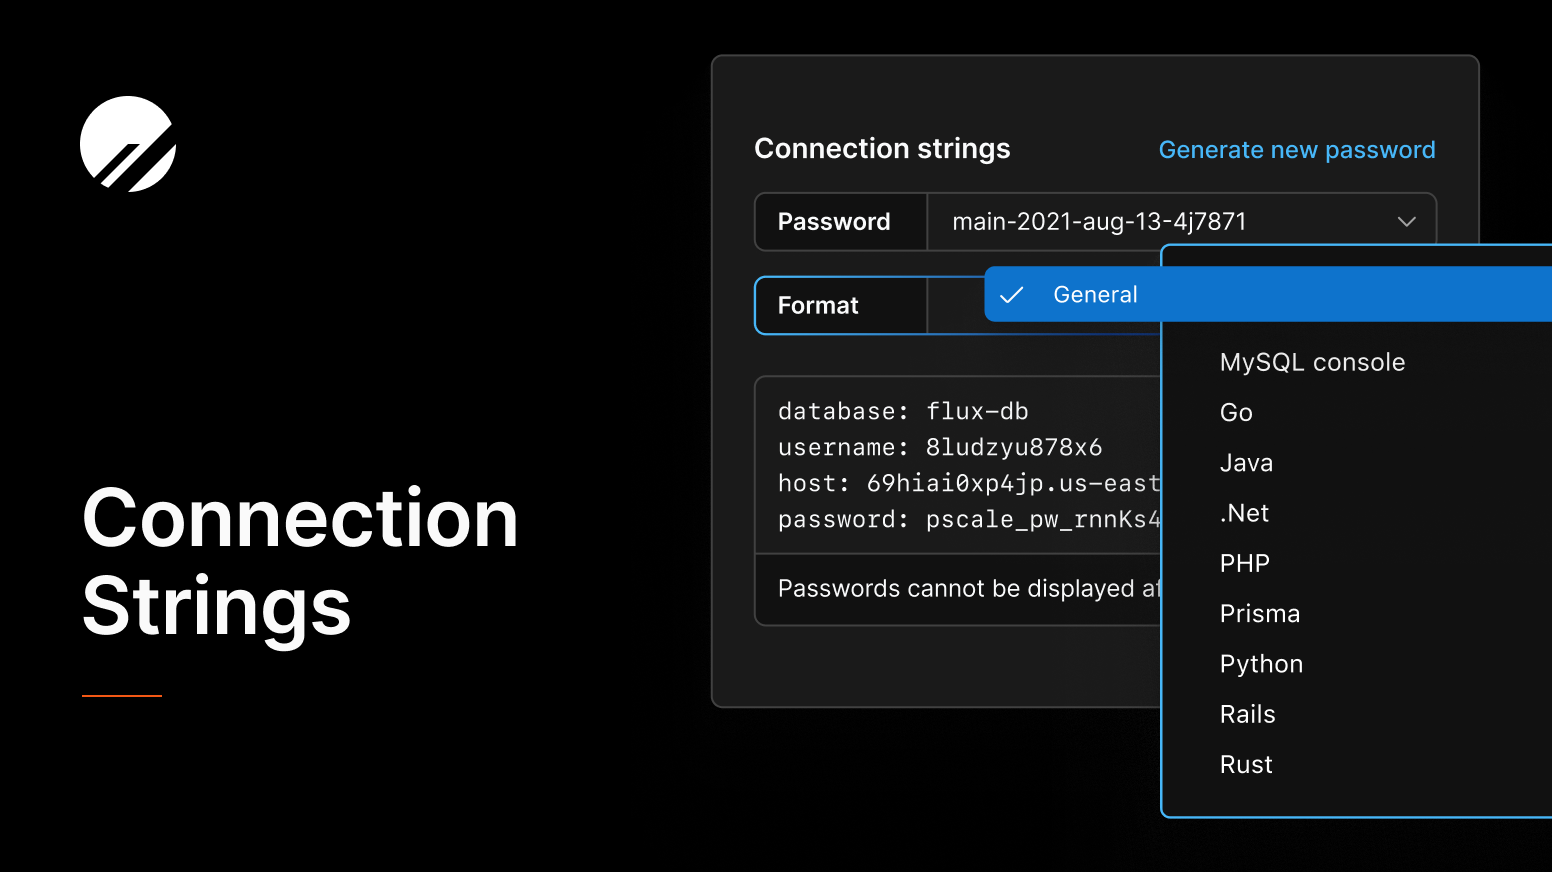 Connect any MySQL client to PlanetScale using Connection Strings